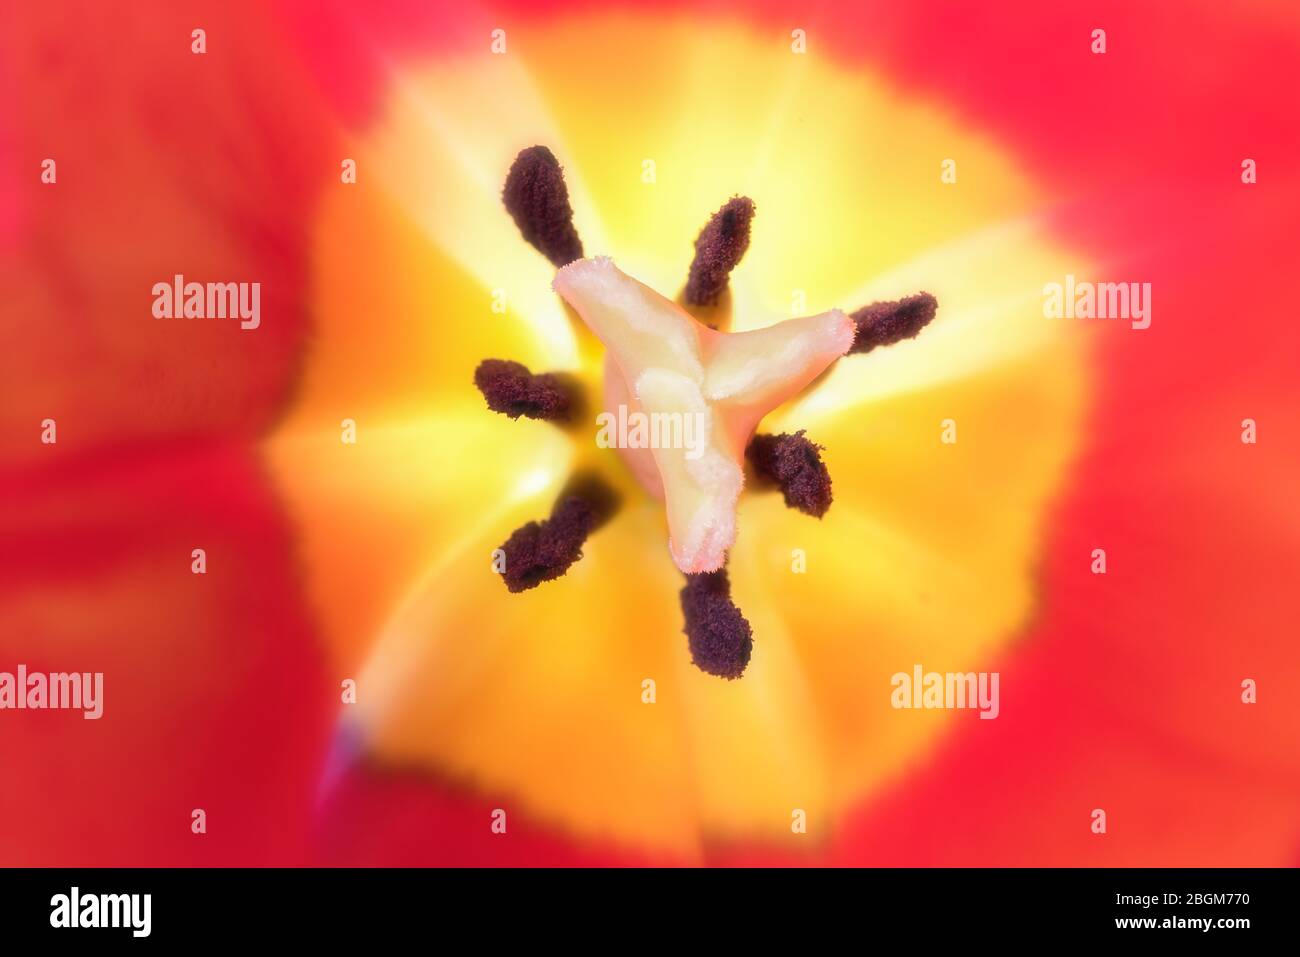 Inside a tulip flower. Psychedelic floral background. Shallow depth of field image. Color blast. Stock Photo